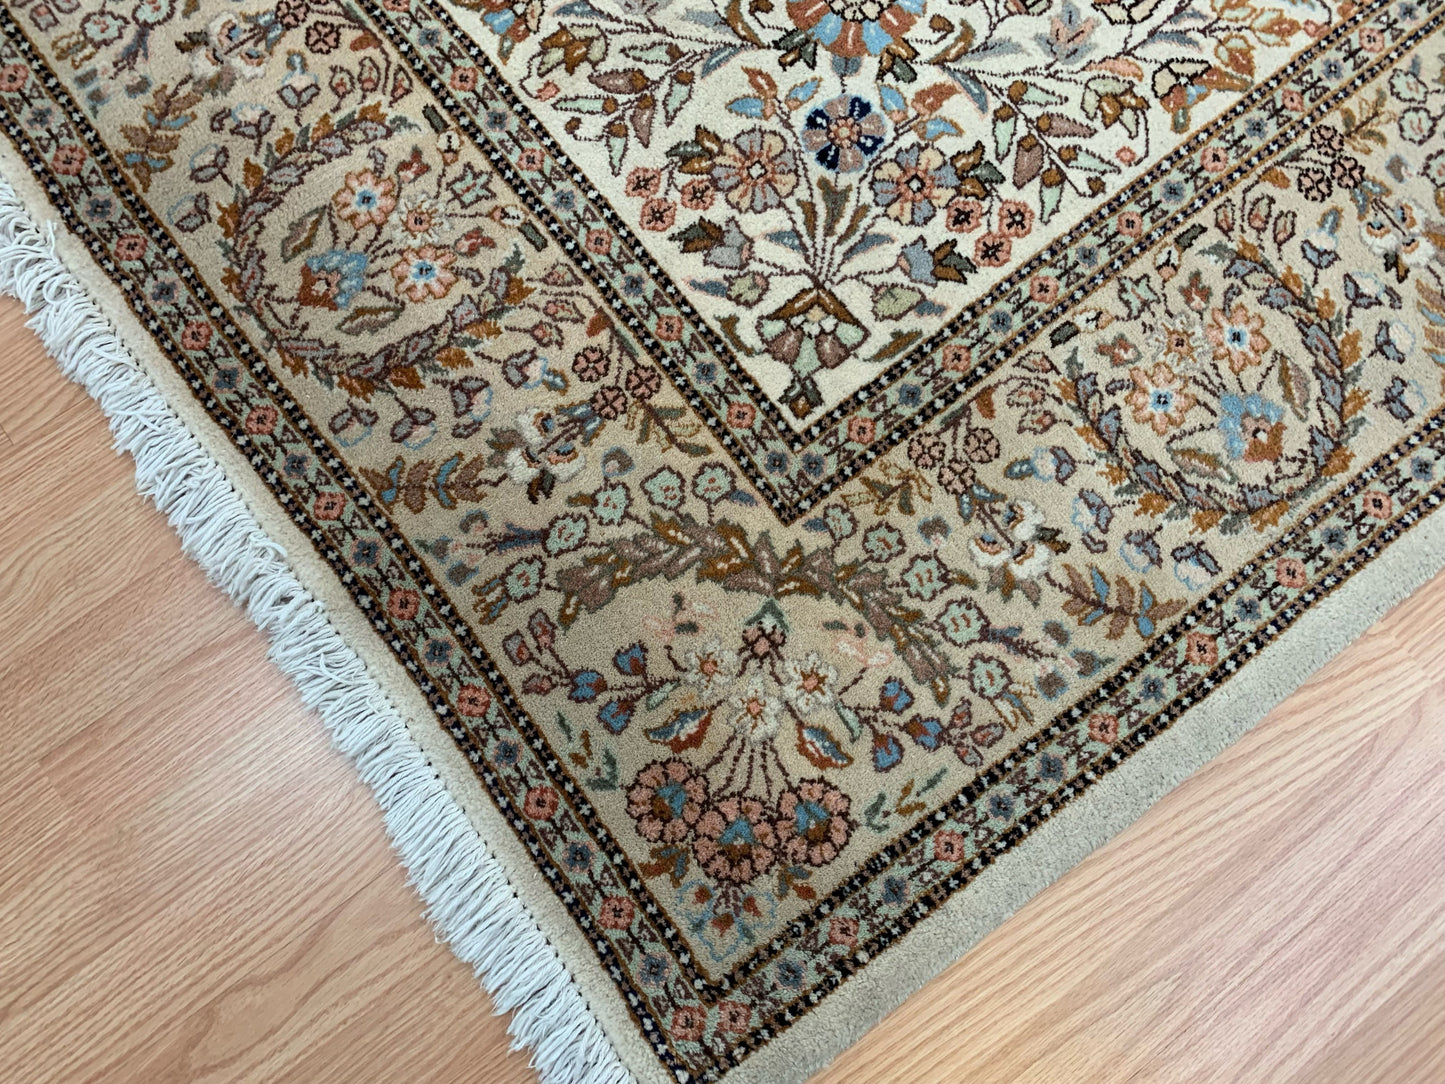 Semi-Antique Hand-Knotted Wool Persian Tabriz Rug (6'7"x9'11")